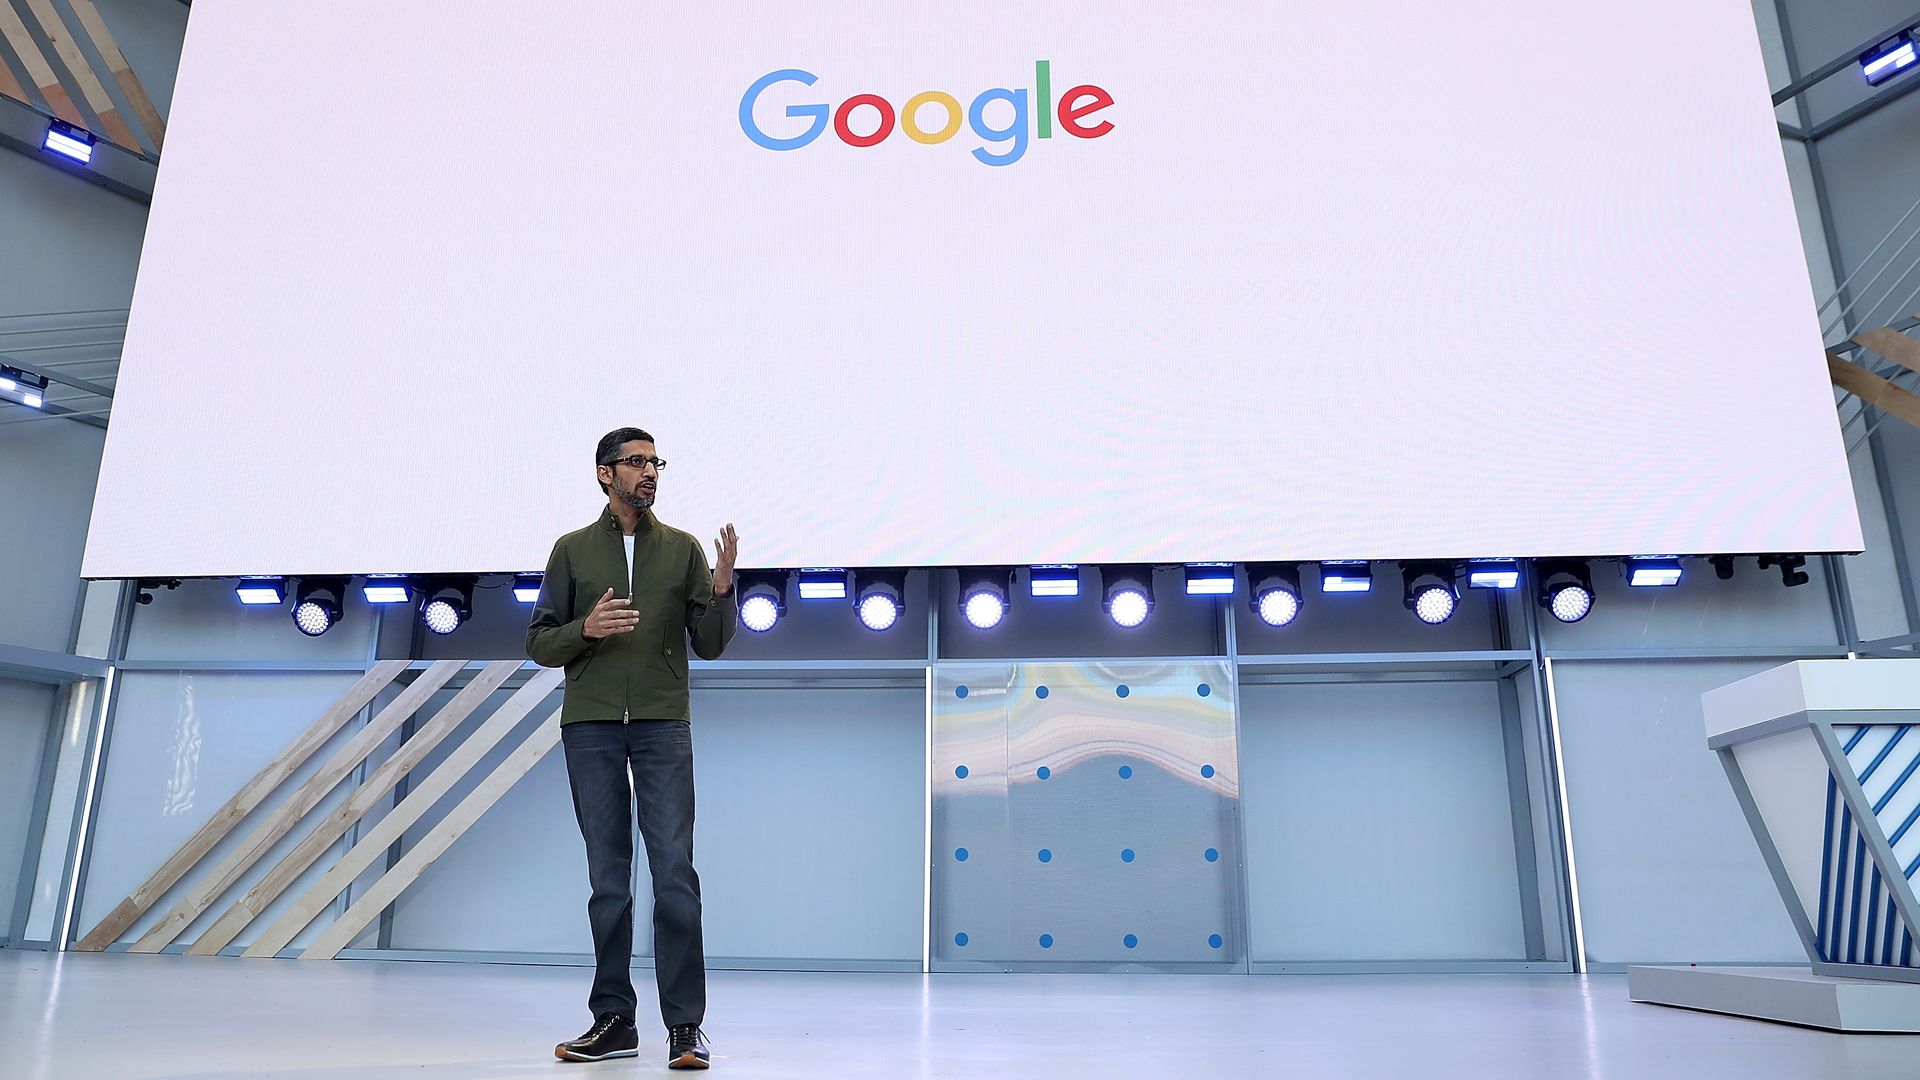 Google logo on a white screen above Sundar Pichai talking with hands up